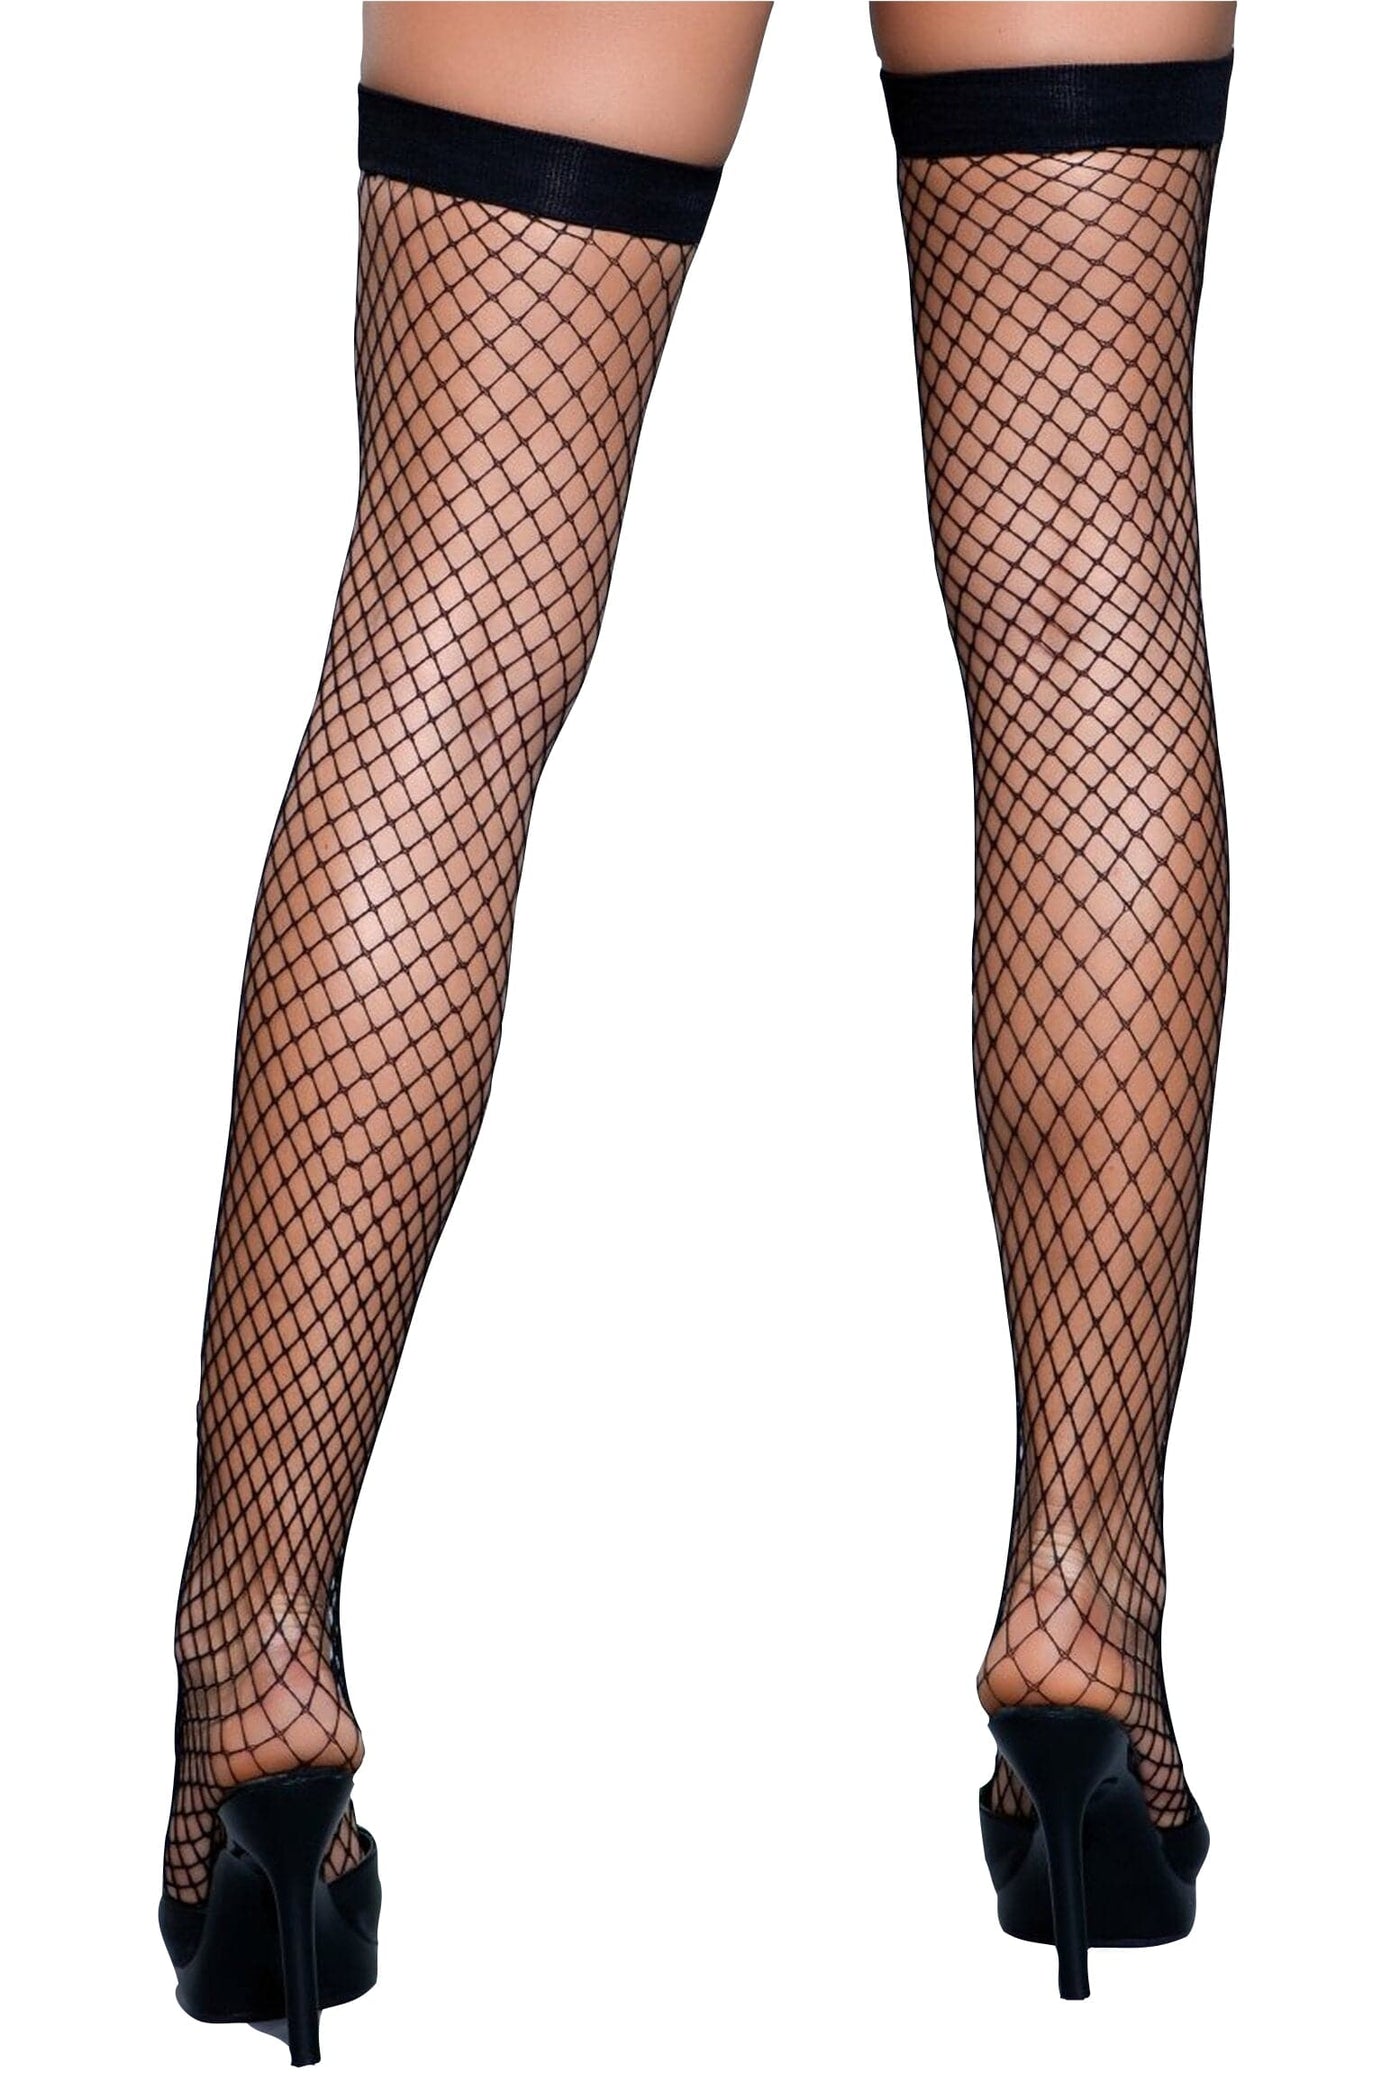 Thigh High Stockings - For Love of Lingerie